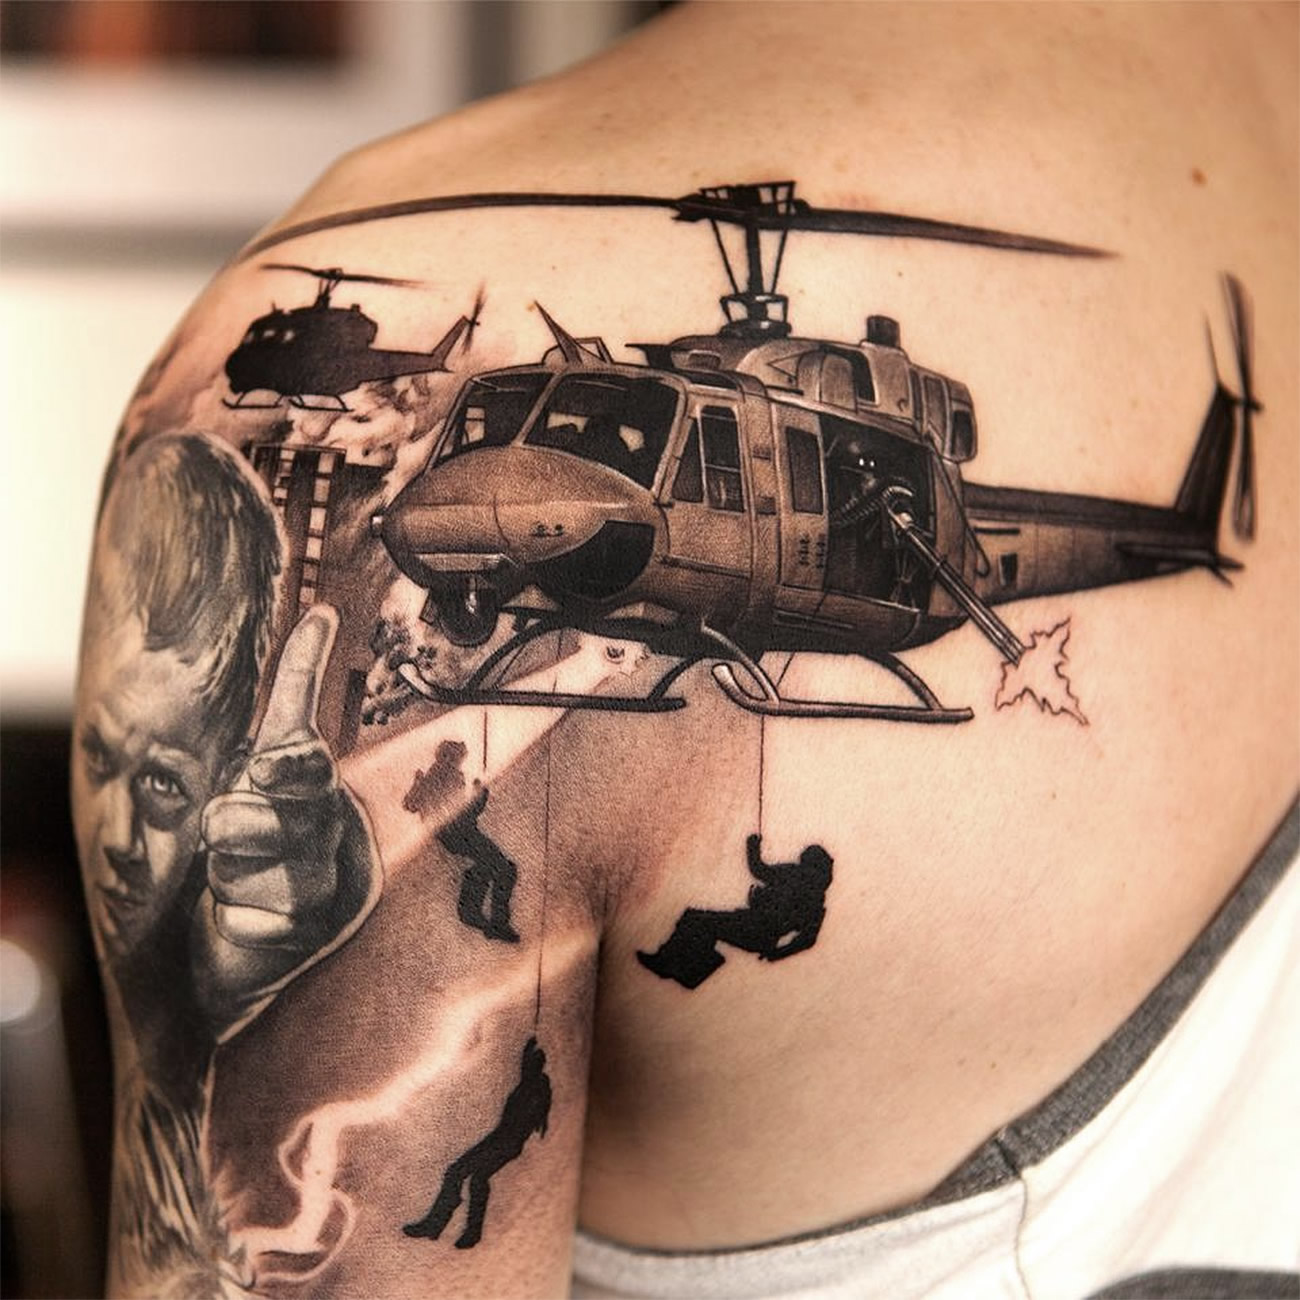 D helicopter tattoo by Niki Norberg